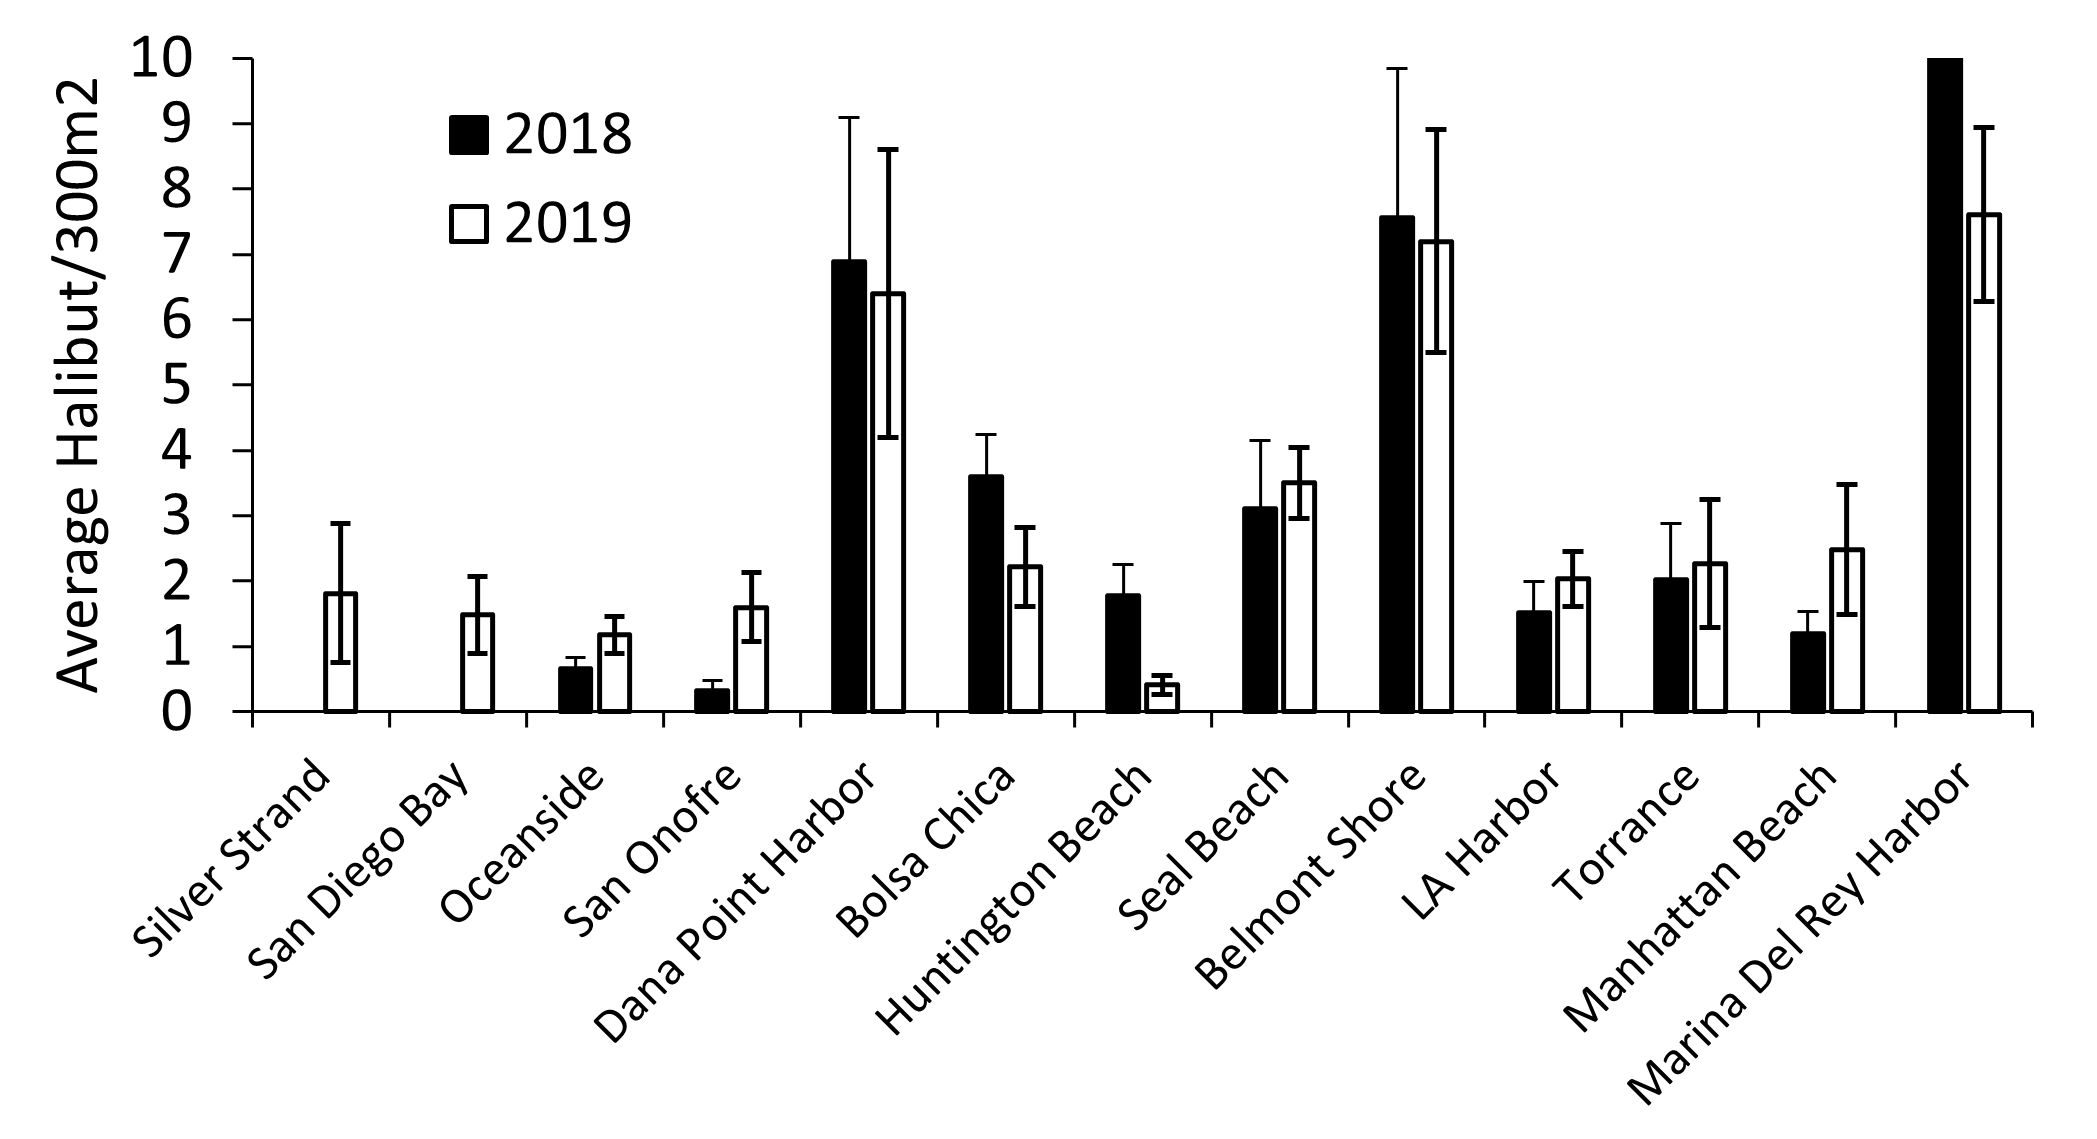 A chart showing the average number of halibut observed at each location for 2018 and 2019 surveys